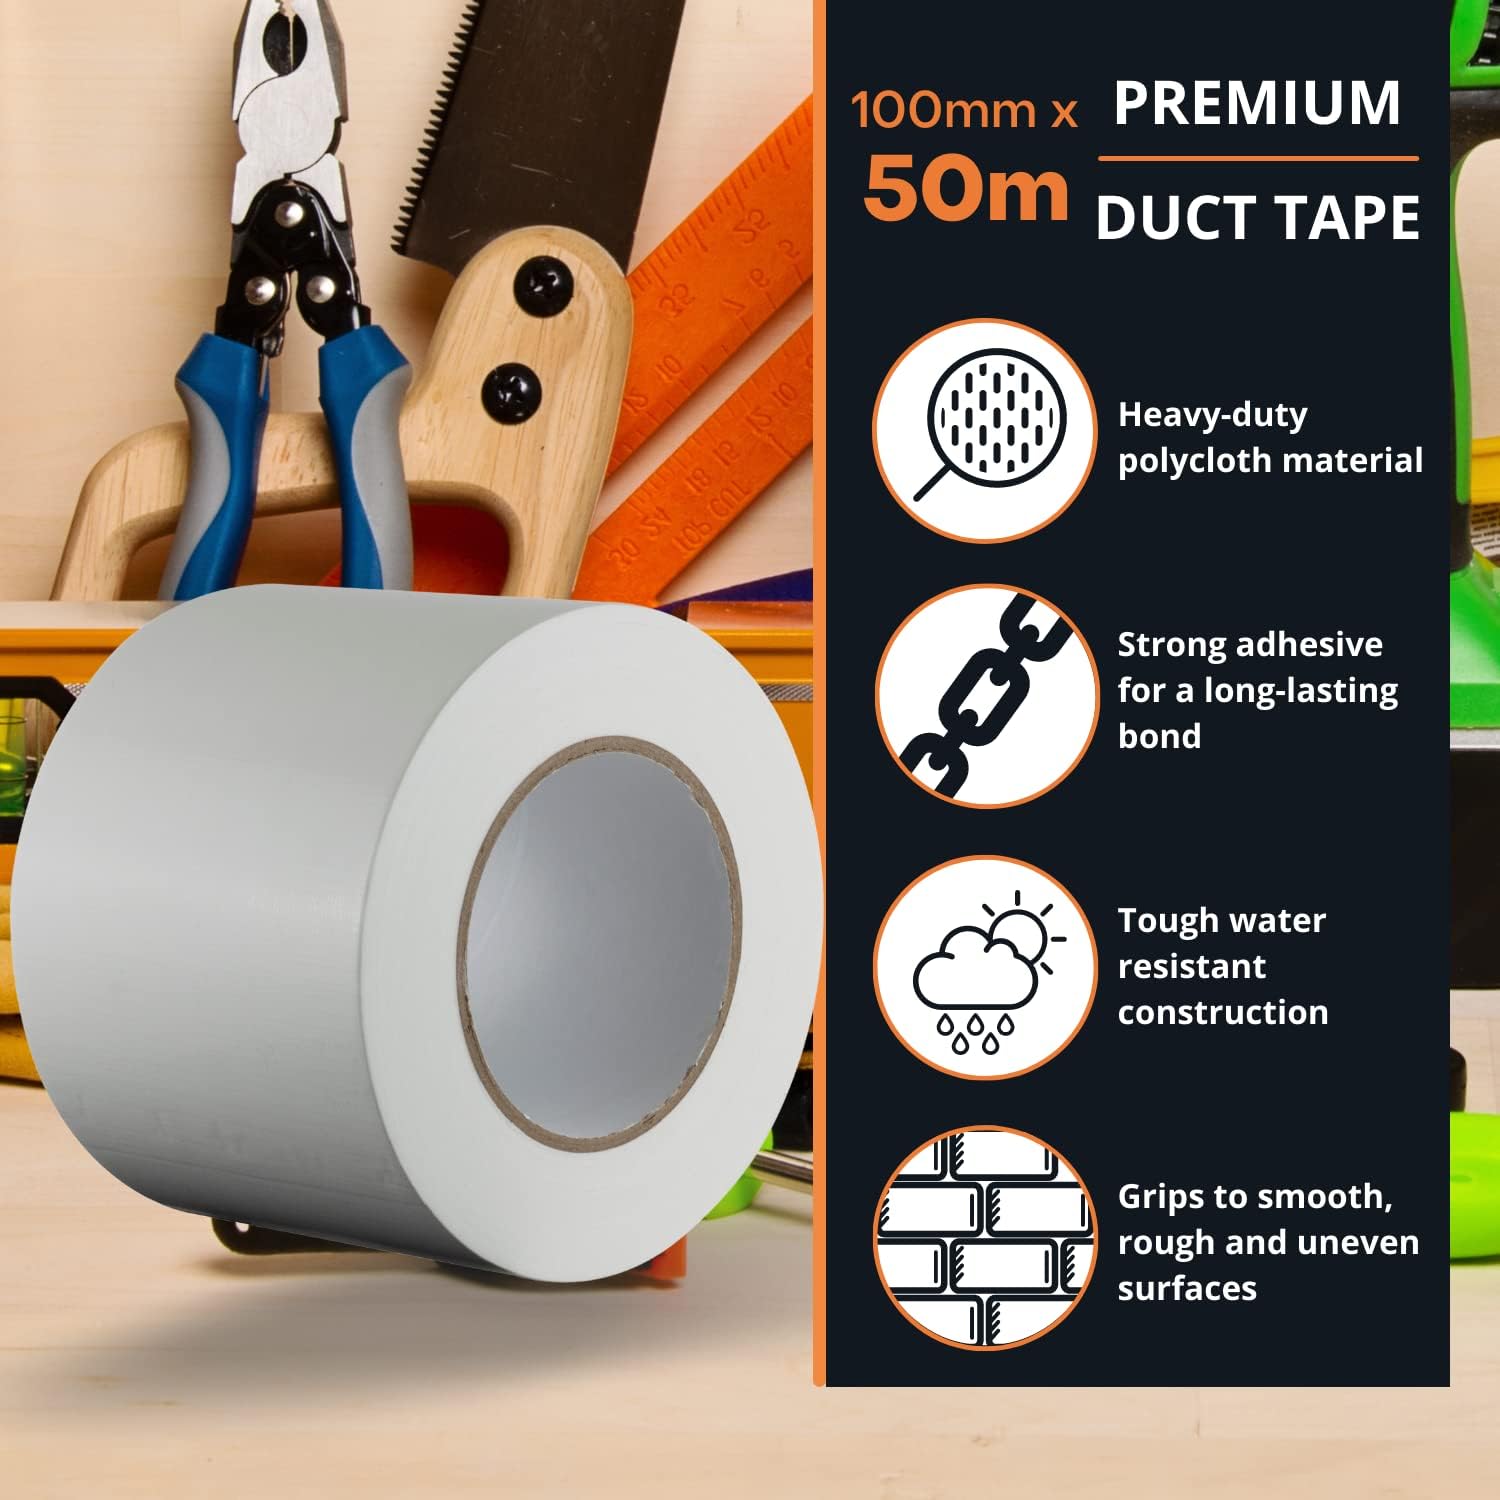 GTSE White Duct Tape, Wide Roll, 4 Inches x 55 Yards (164 ft), Heavy-Duty, Waterproof, 1 Roll Pack